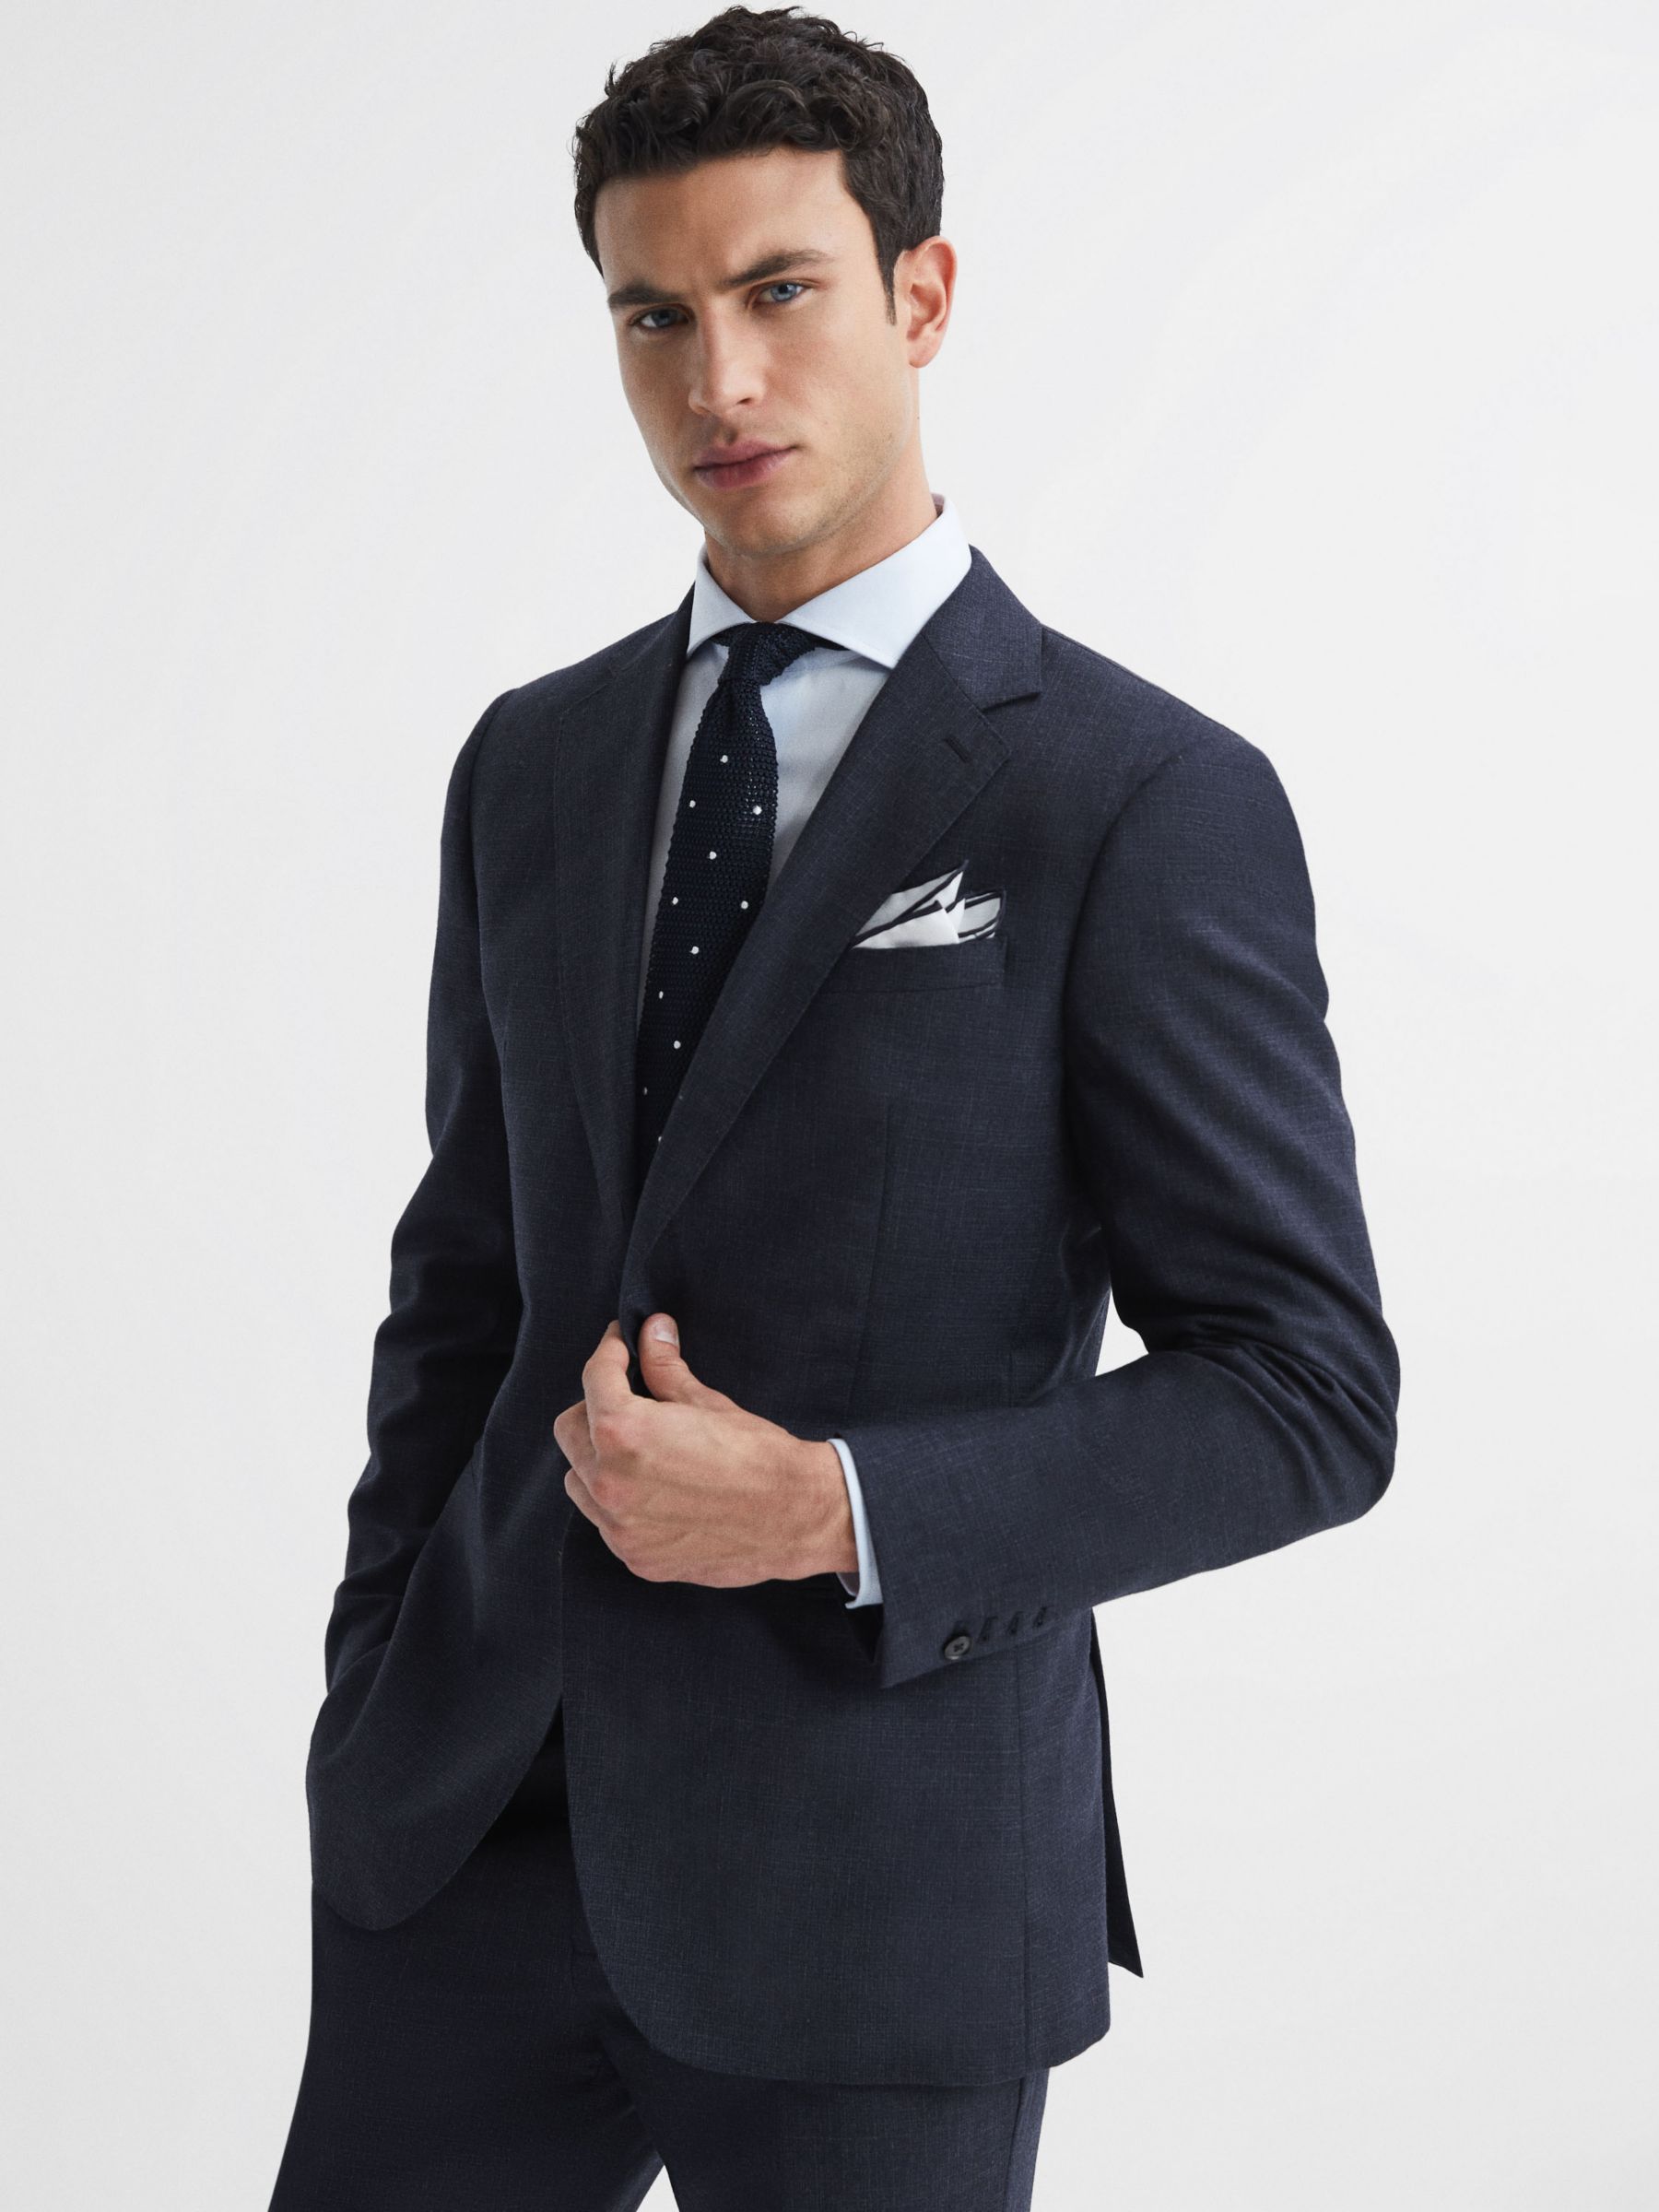 Reiss Dunn Textured Wool Tailored Fit Suit Jacket, Navy at John Lewis ...